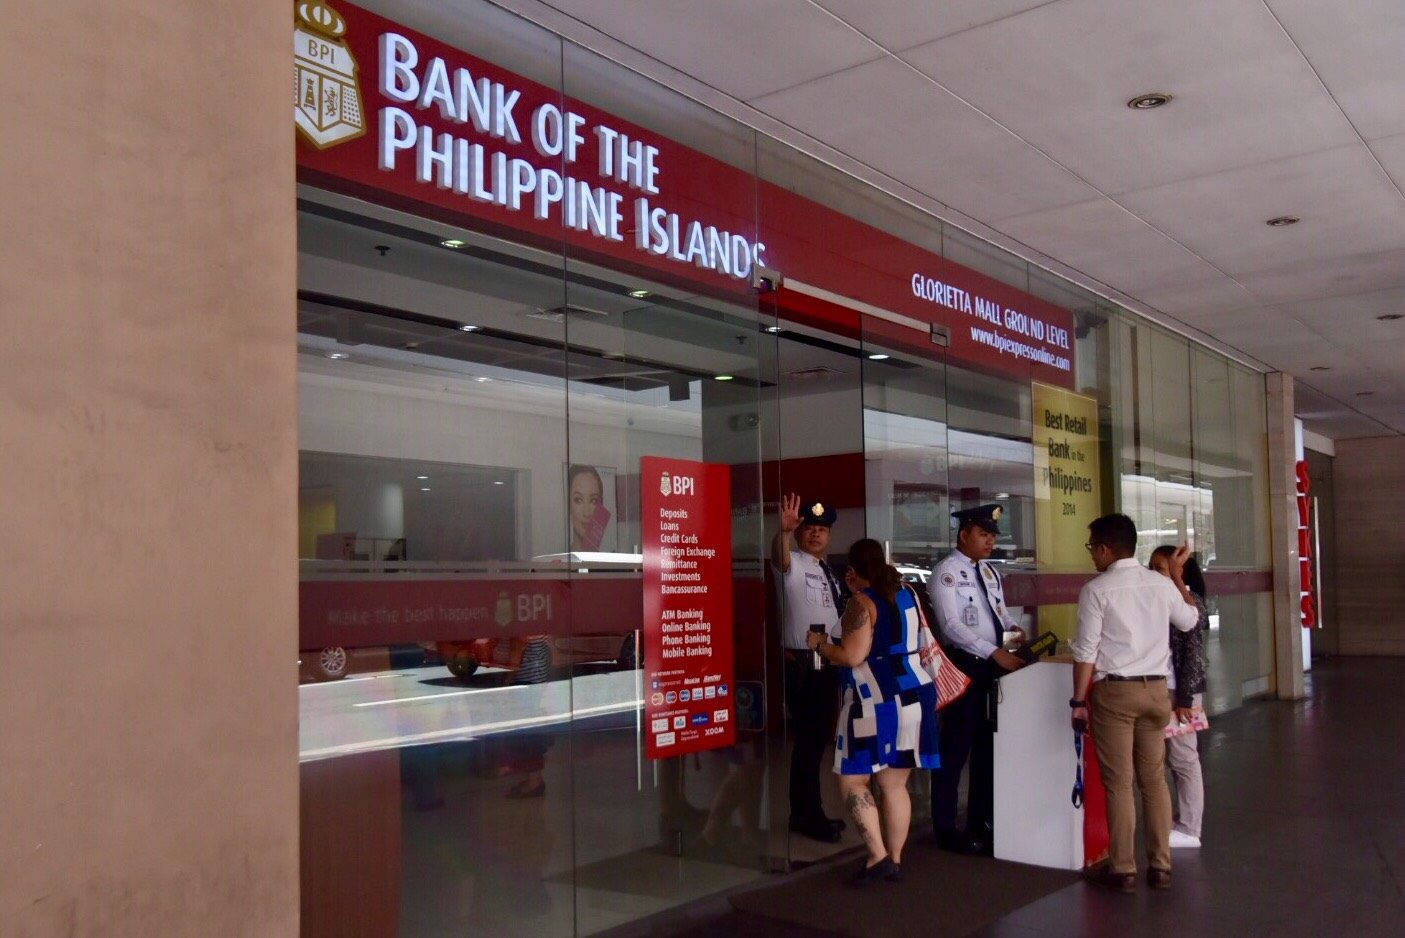 BPI customers get surprise deductions due to glitch